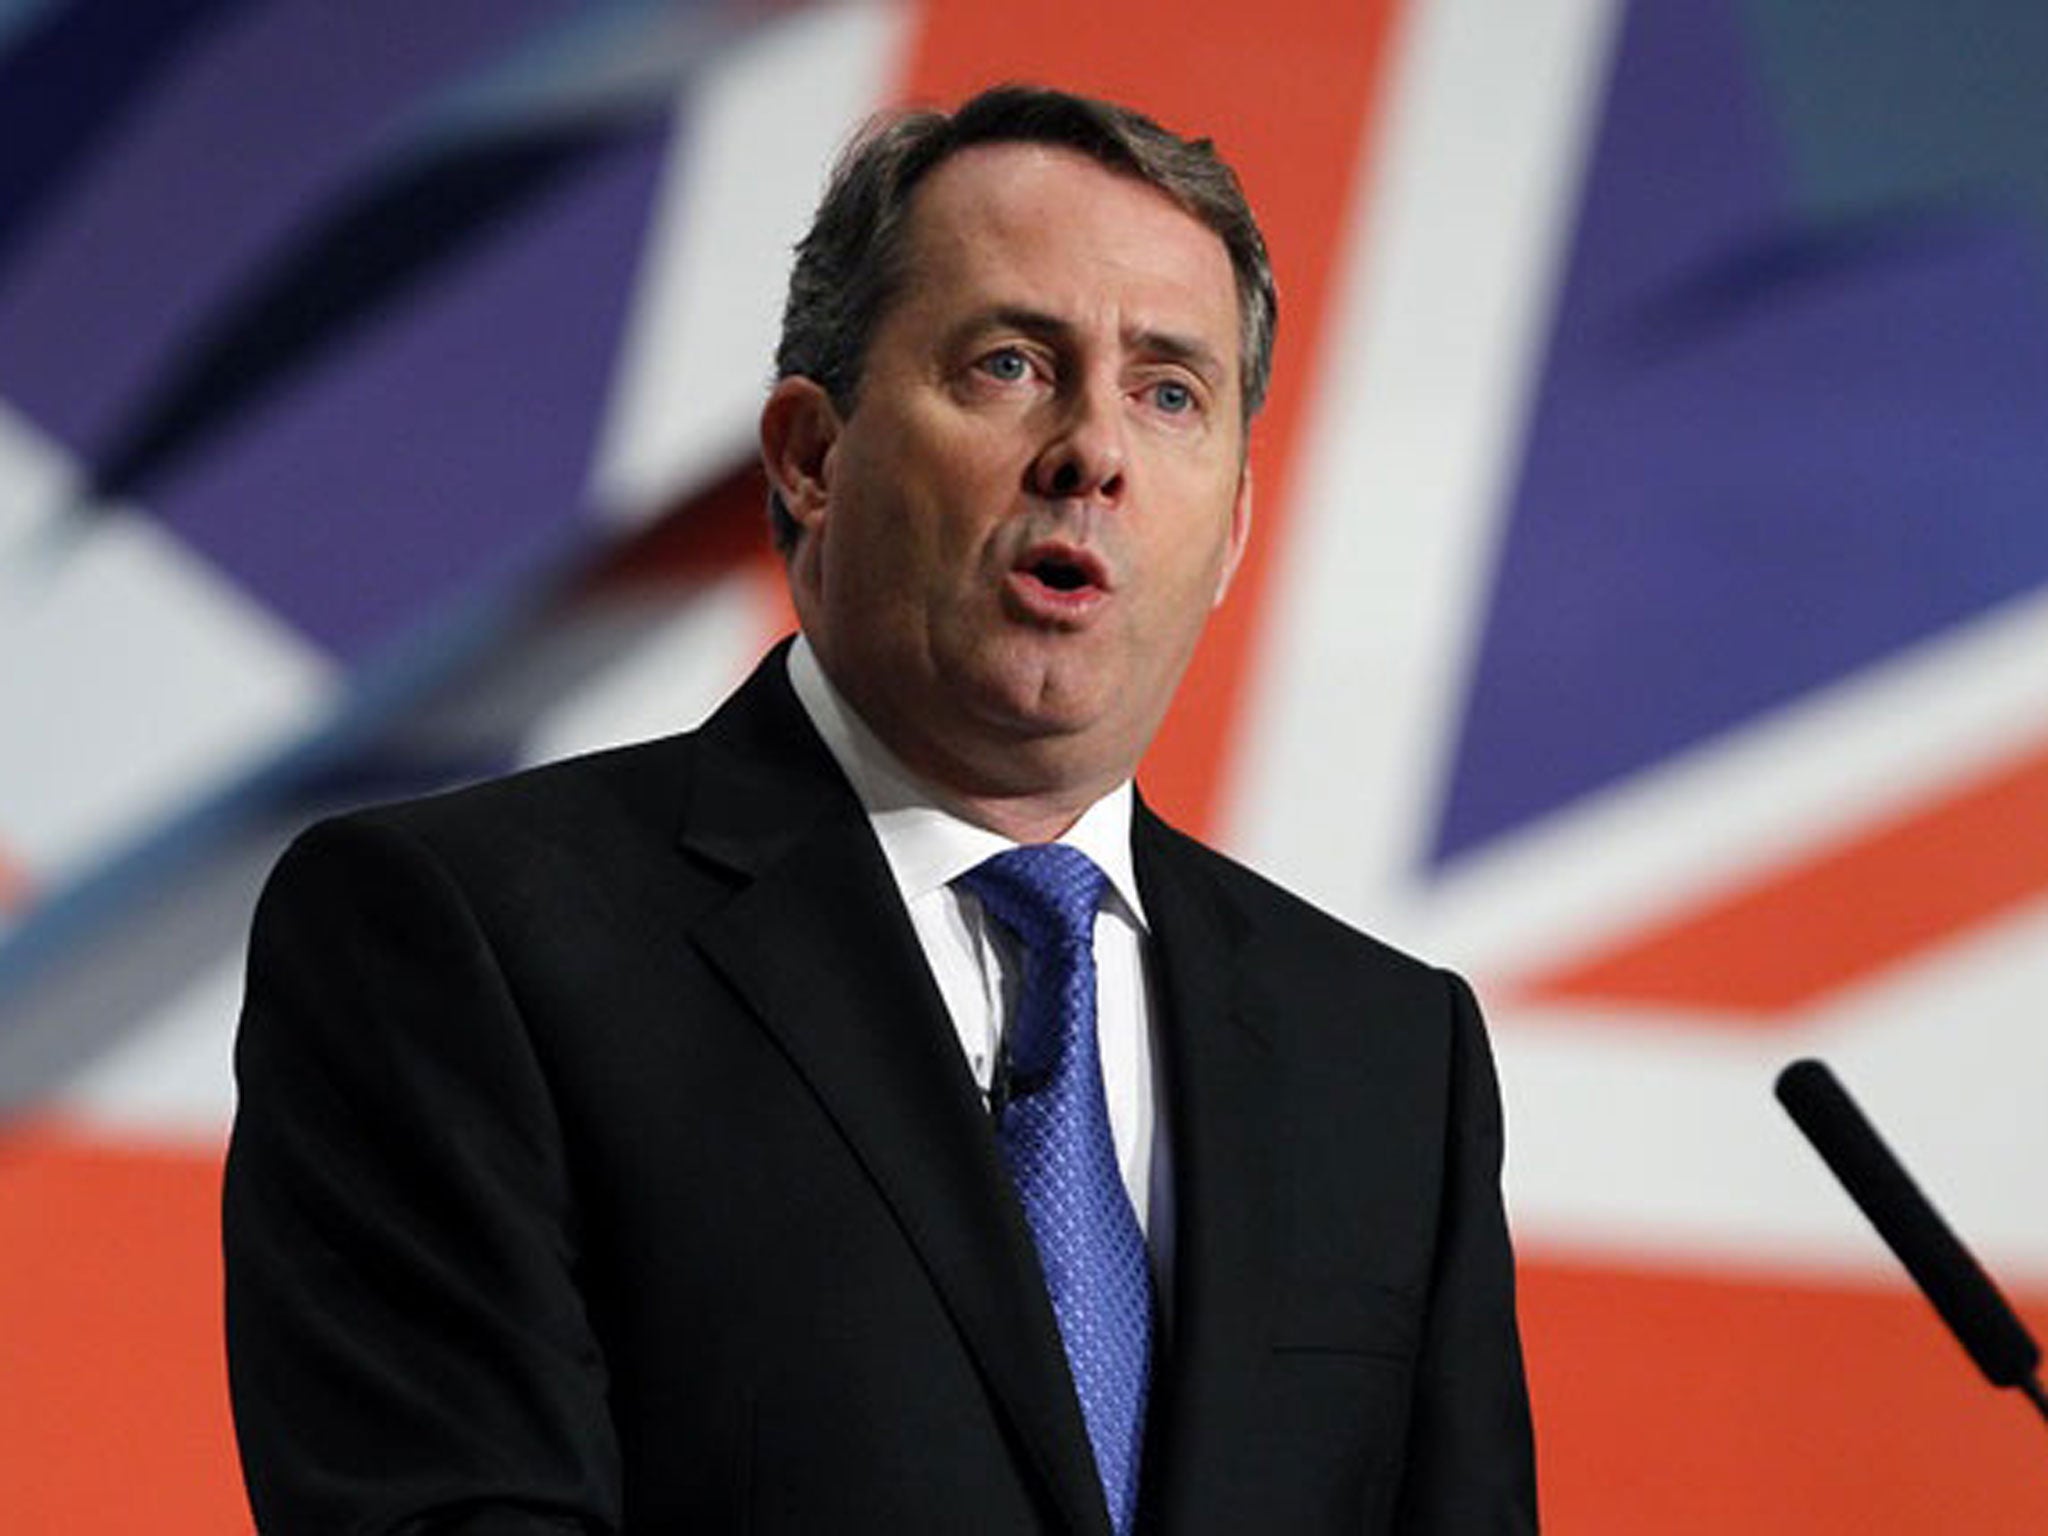 Liam Fox was set to speak at a conference for the right-wing American Enterprise Institute in Washington